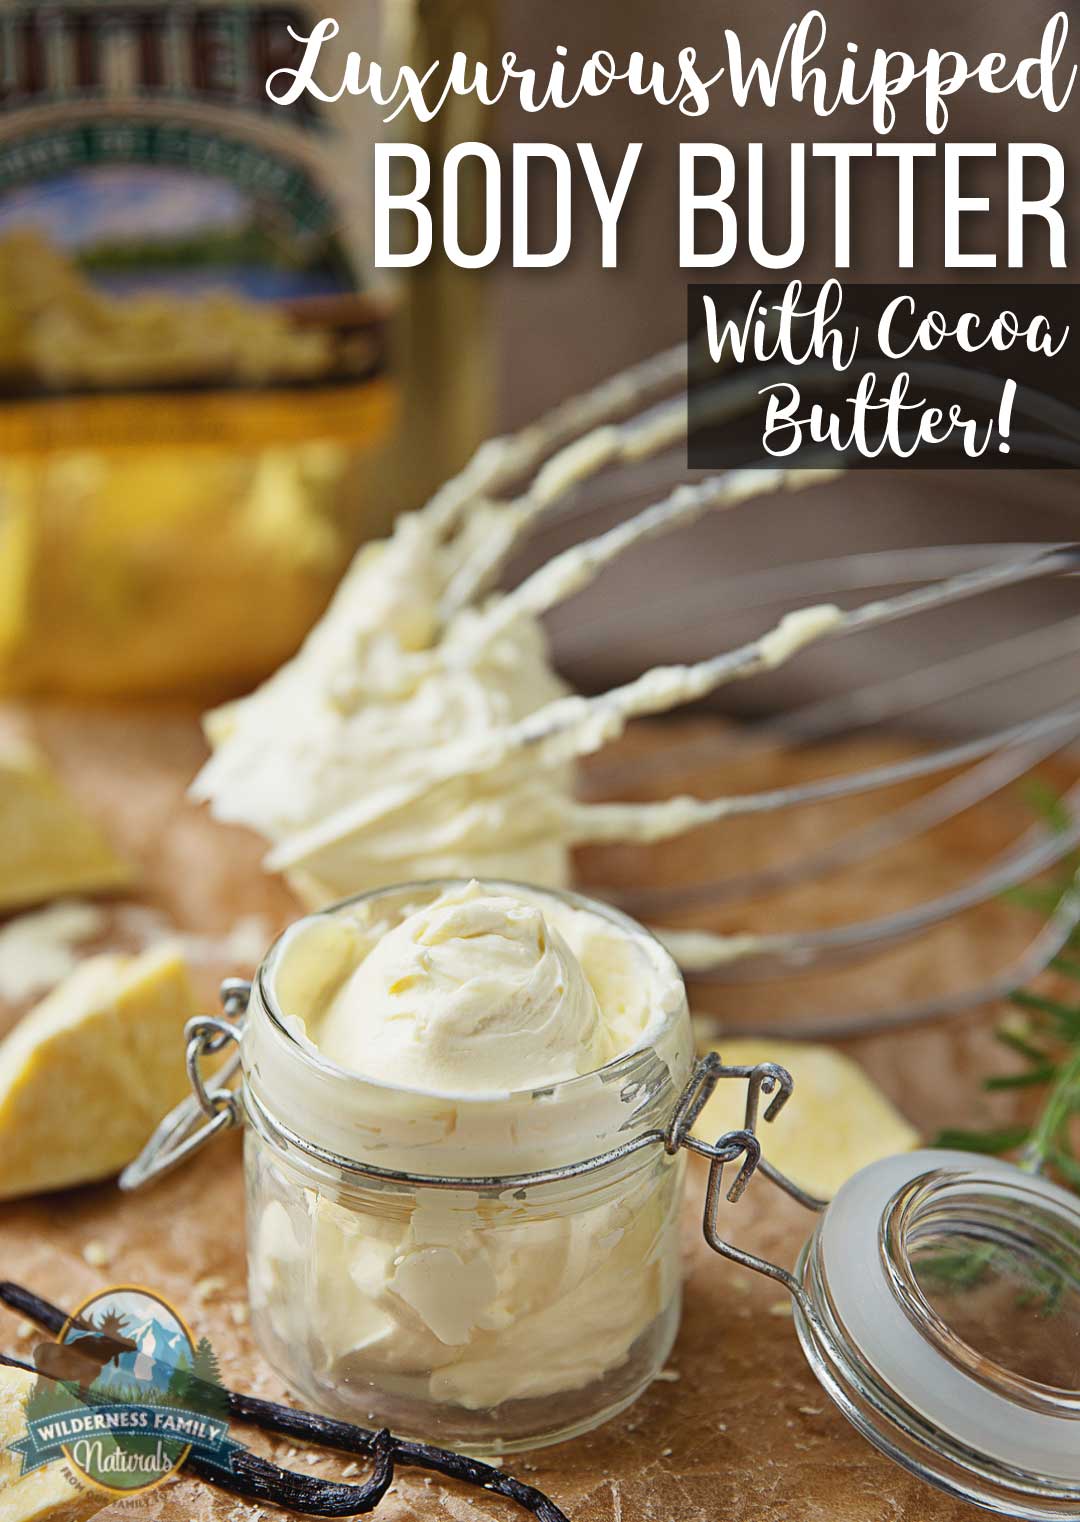 Whipped Body Butter (with cacao butter!) | It is amazingly simple to turn hard chunks of raw cacao butter into a fluffy and silky whipped body butter that sinks into skin in a matter of minutes. Using cacao butter for skin will reap you 2 benefits: your skin will be soft and silky, and you'll also smell like irresistible chocolate! | WildernessFamilyNaturals.com